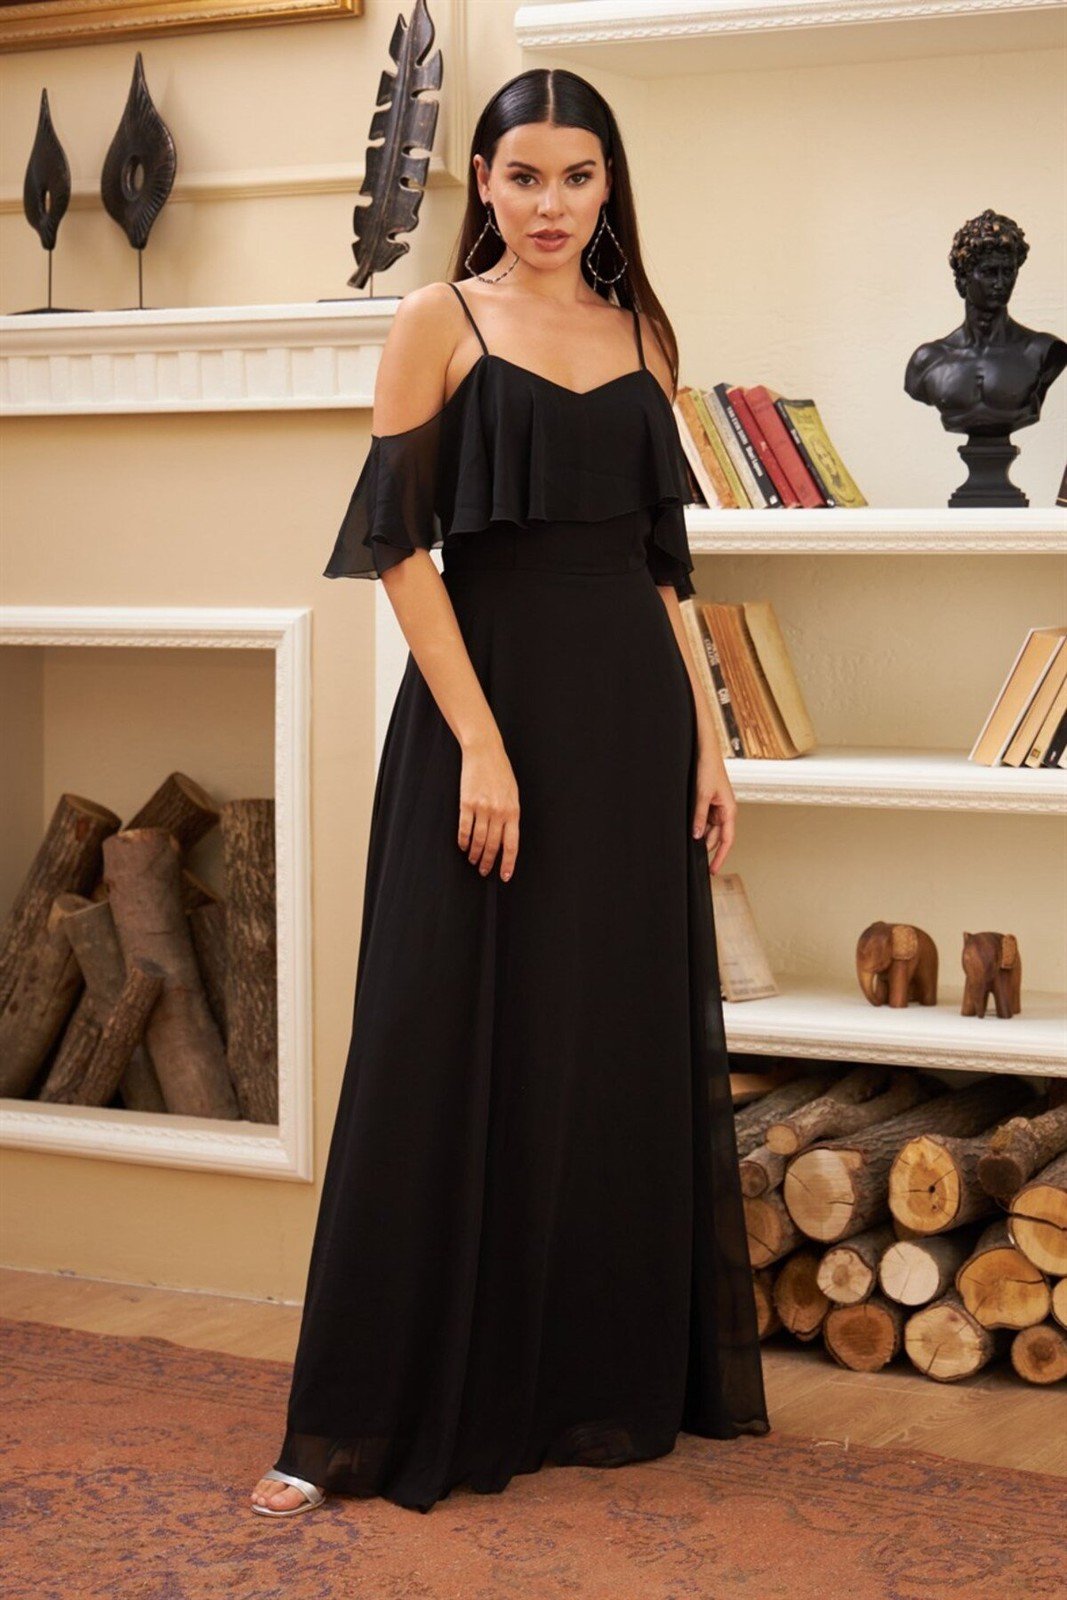 Carmen Black Evening Dress with Low Sleeves and Straps